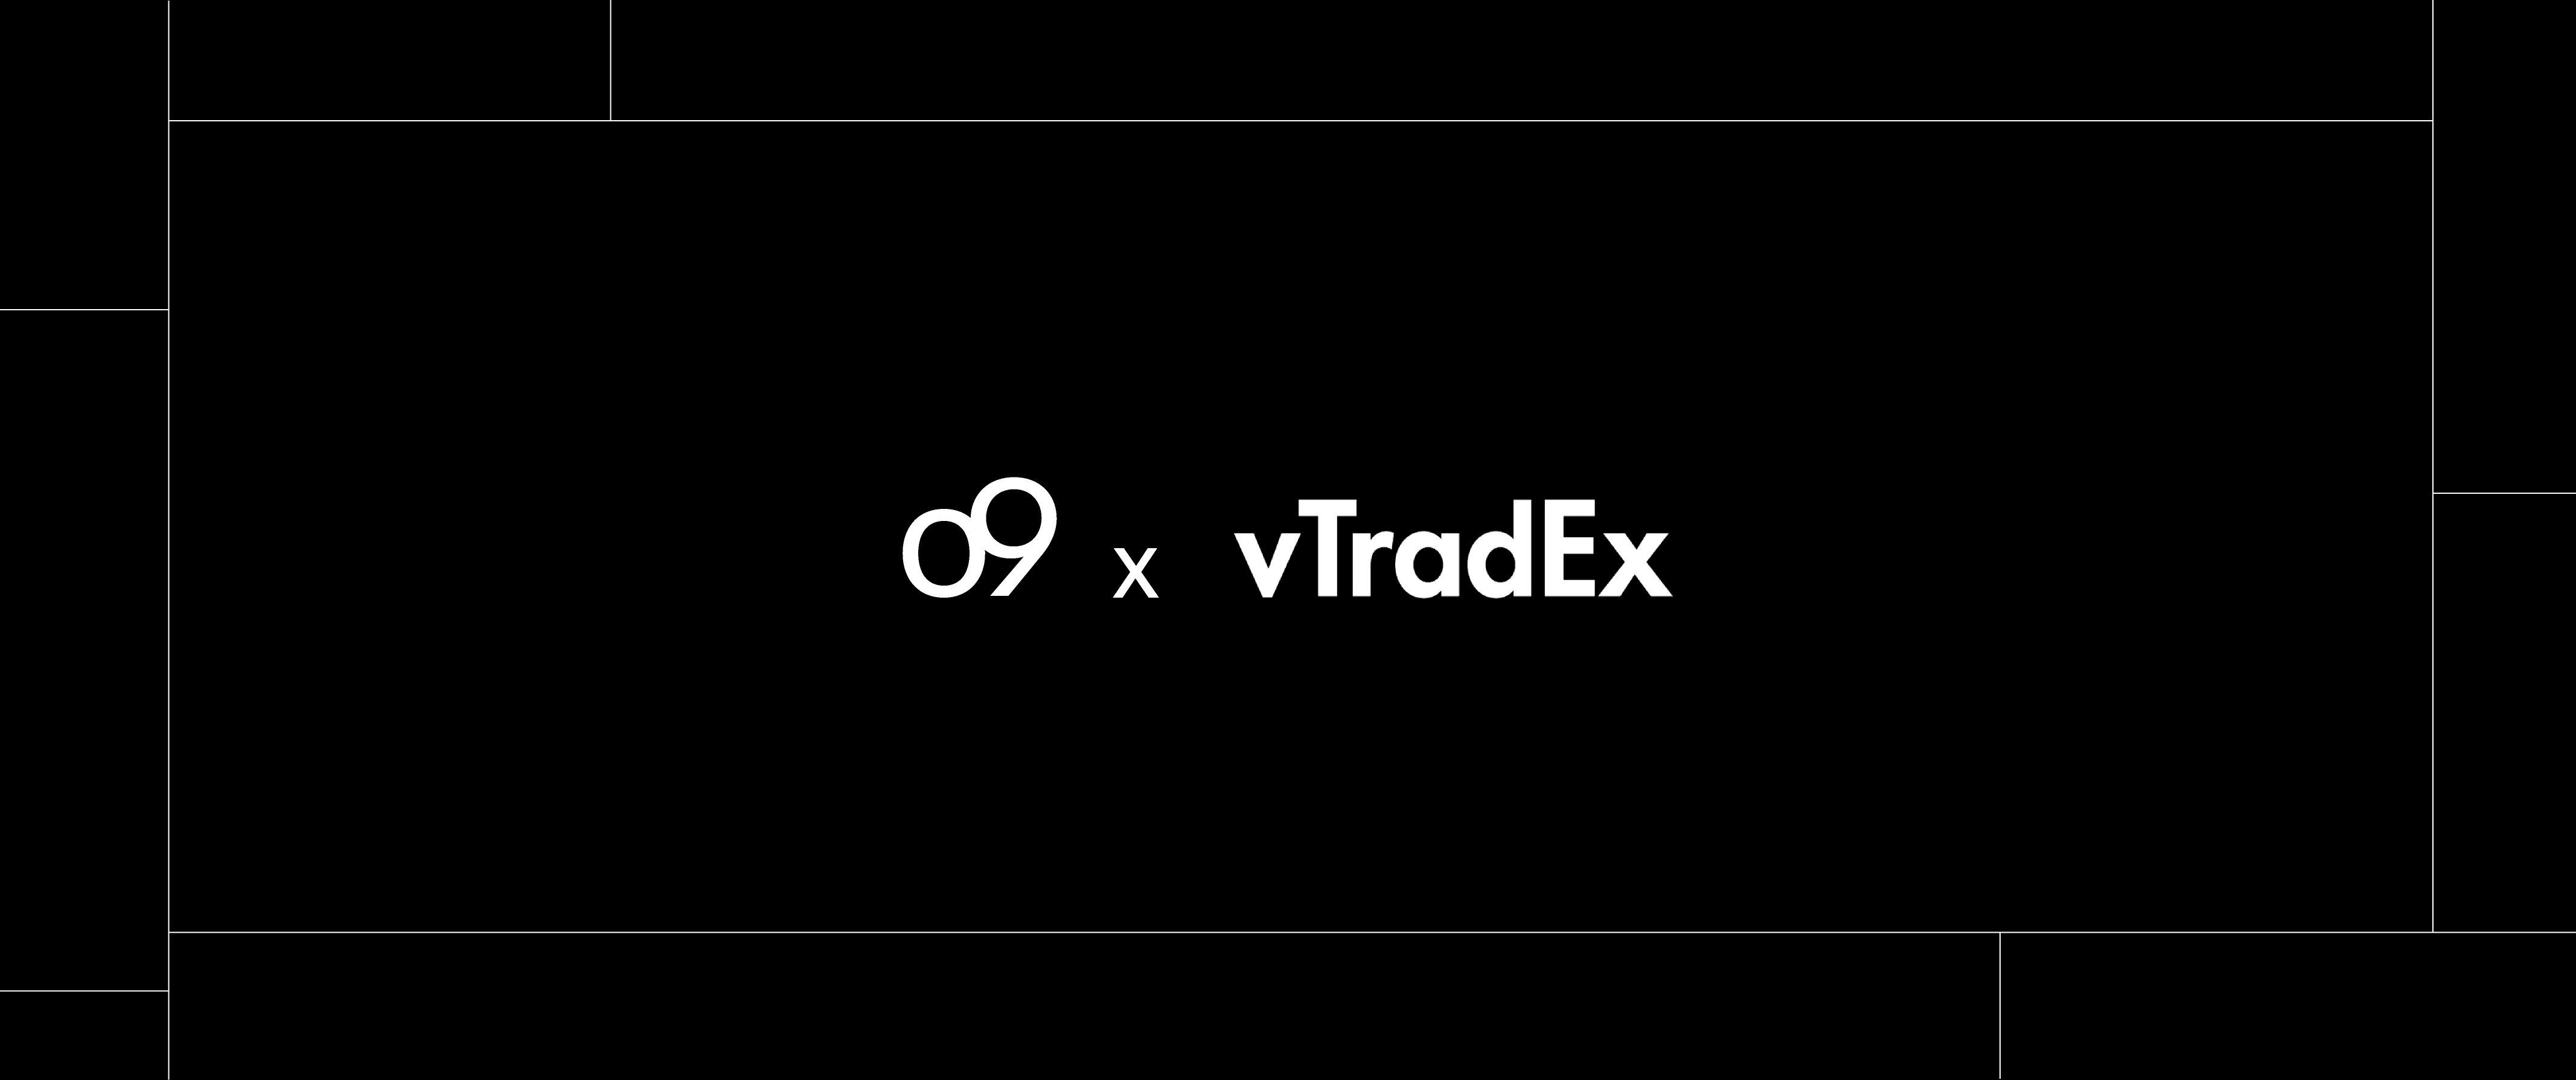 o9 Solutions announces a strategic partnership with vTradEx to enter the Chinese market